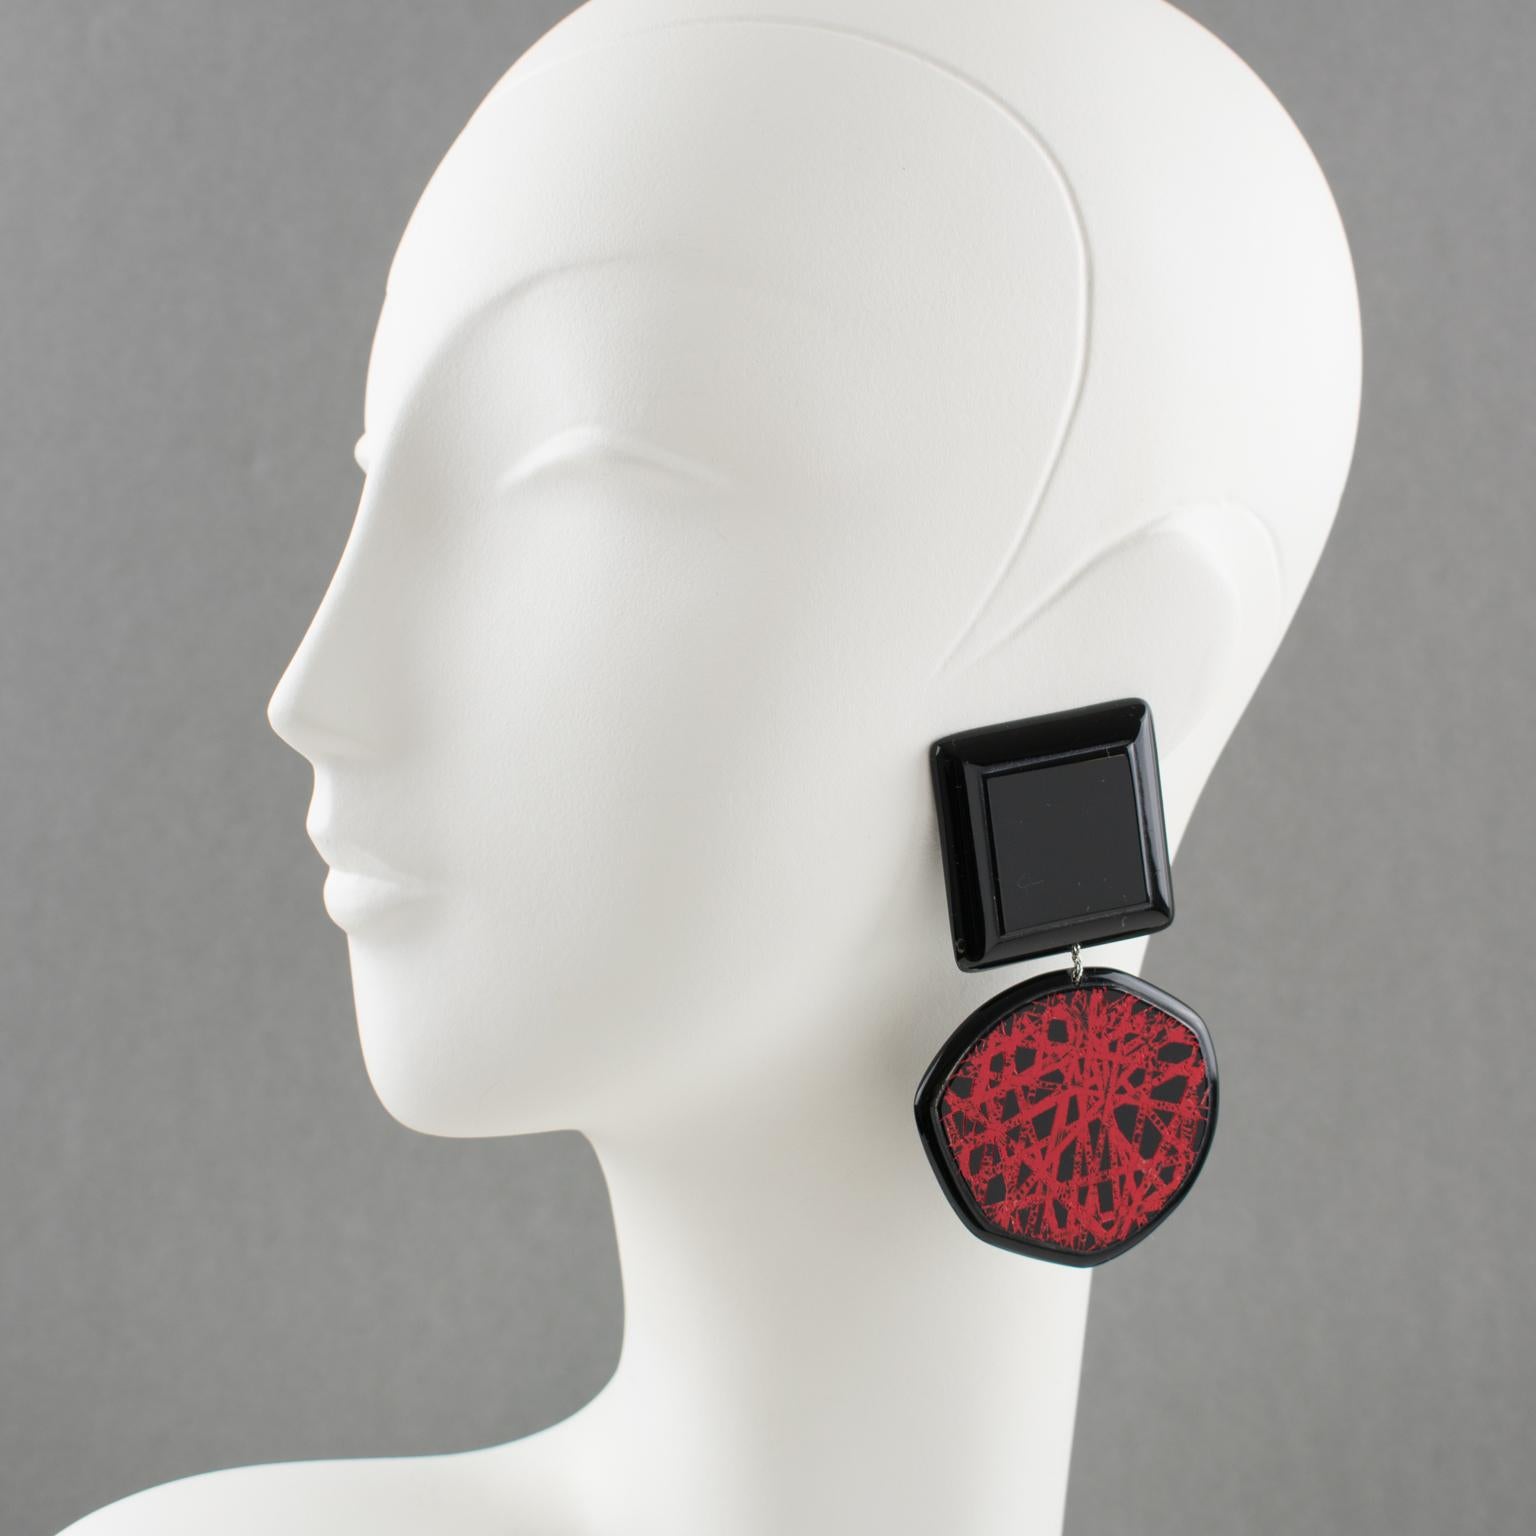 Charming Anne and Frank Vigneri Lucite clip-on earrings. Oversized geometric dangling design with square and free-form disc shape in licorice black Lucite or resin. The disc is ornate with a textured red design similar to intersecting lines. No